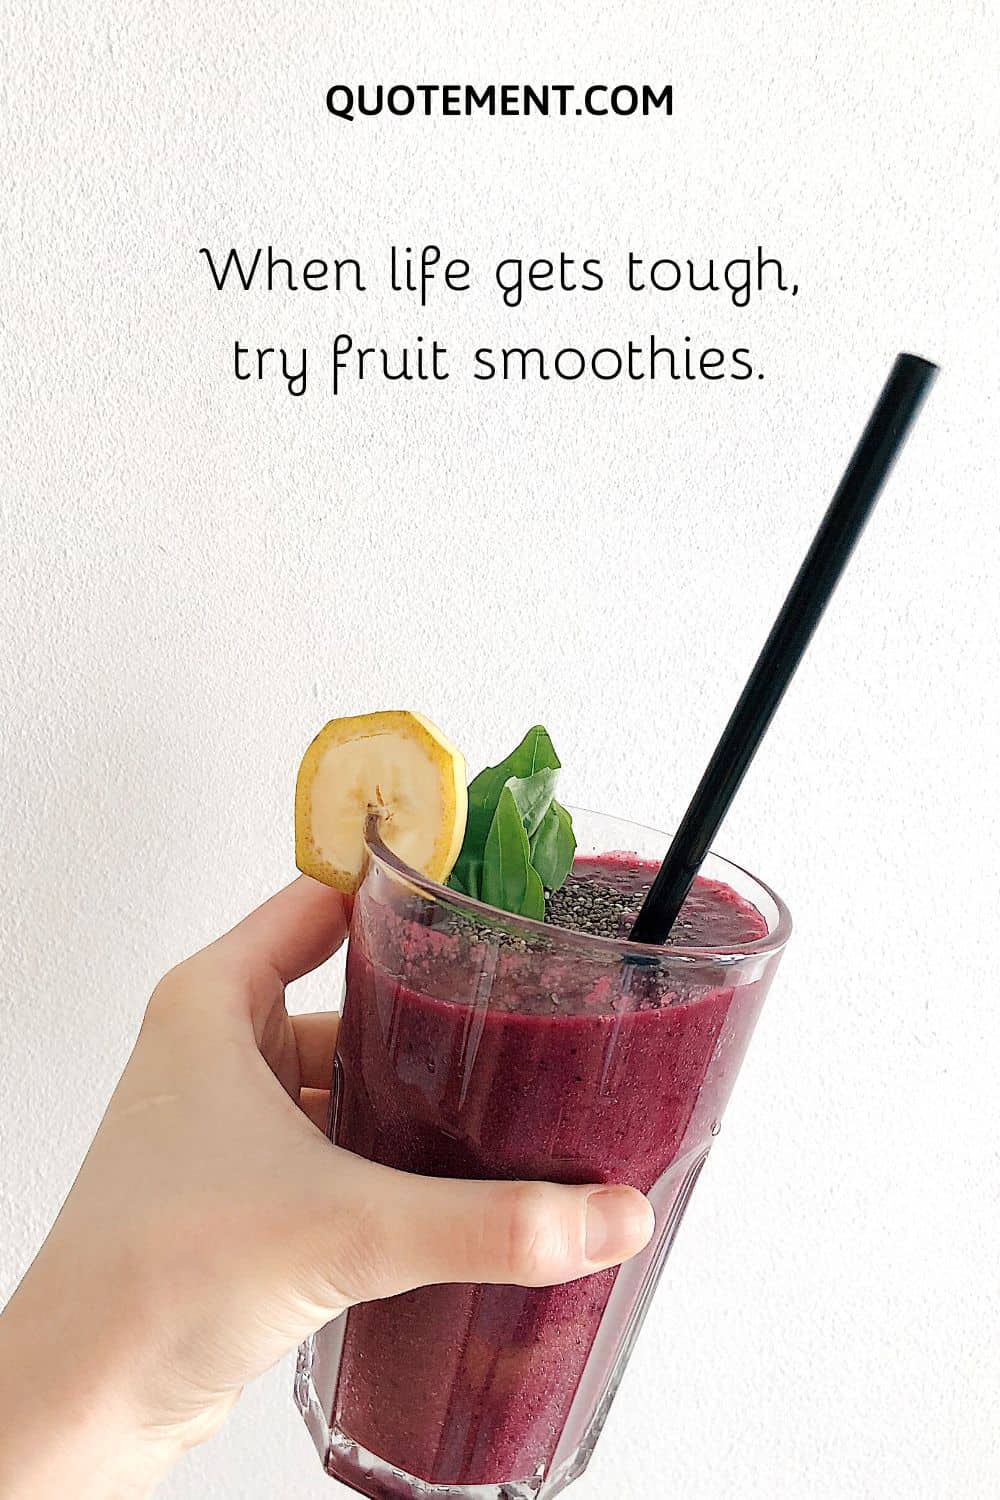 When life gets tough, try fruit smoothies.